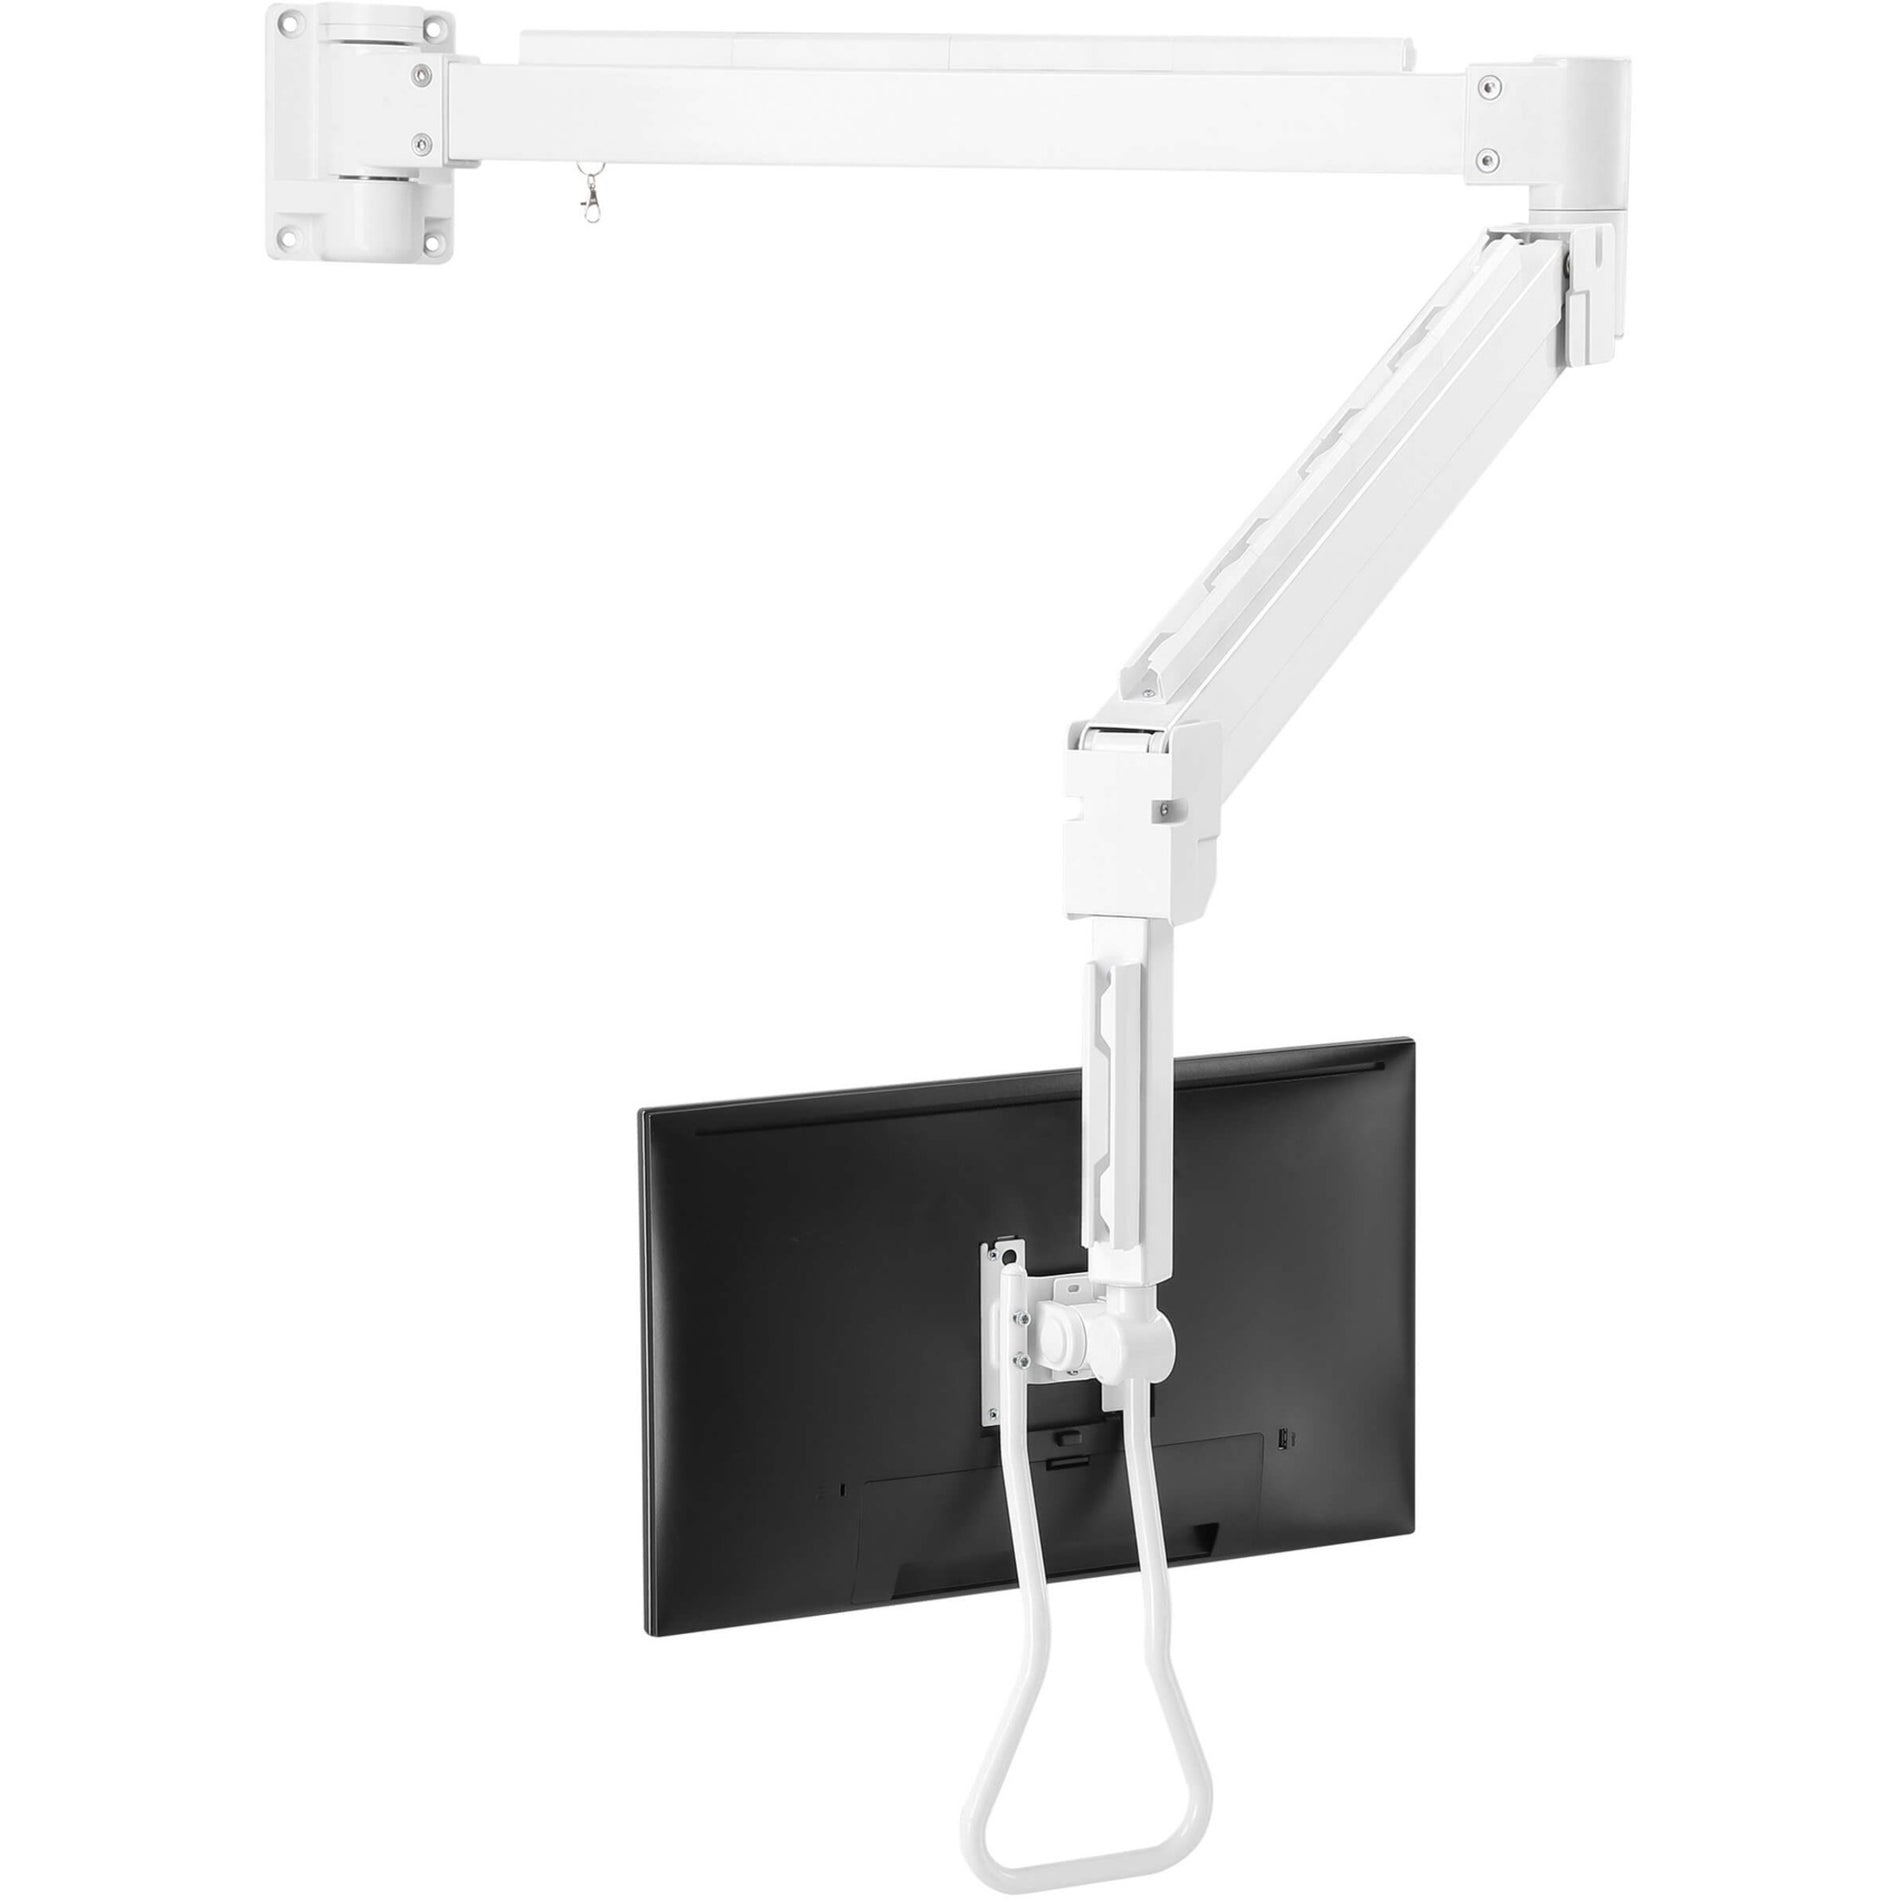 Tripp Lite DWMLARM1732AM Extended-Reach TV Wall Mount, Full Motion, Cable Management, 360° Rotation, Antimicrobial, 17.6 lb Capacity